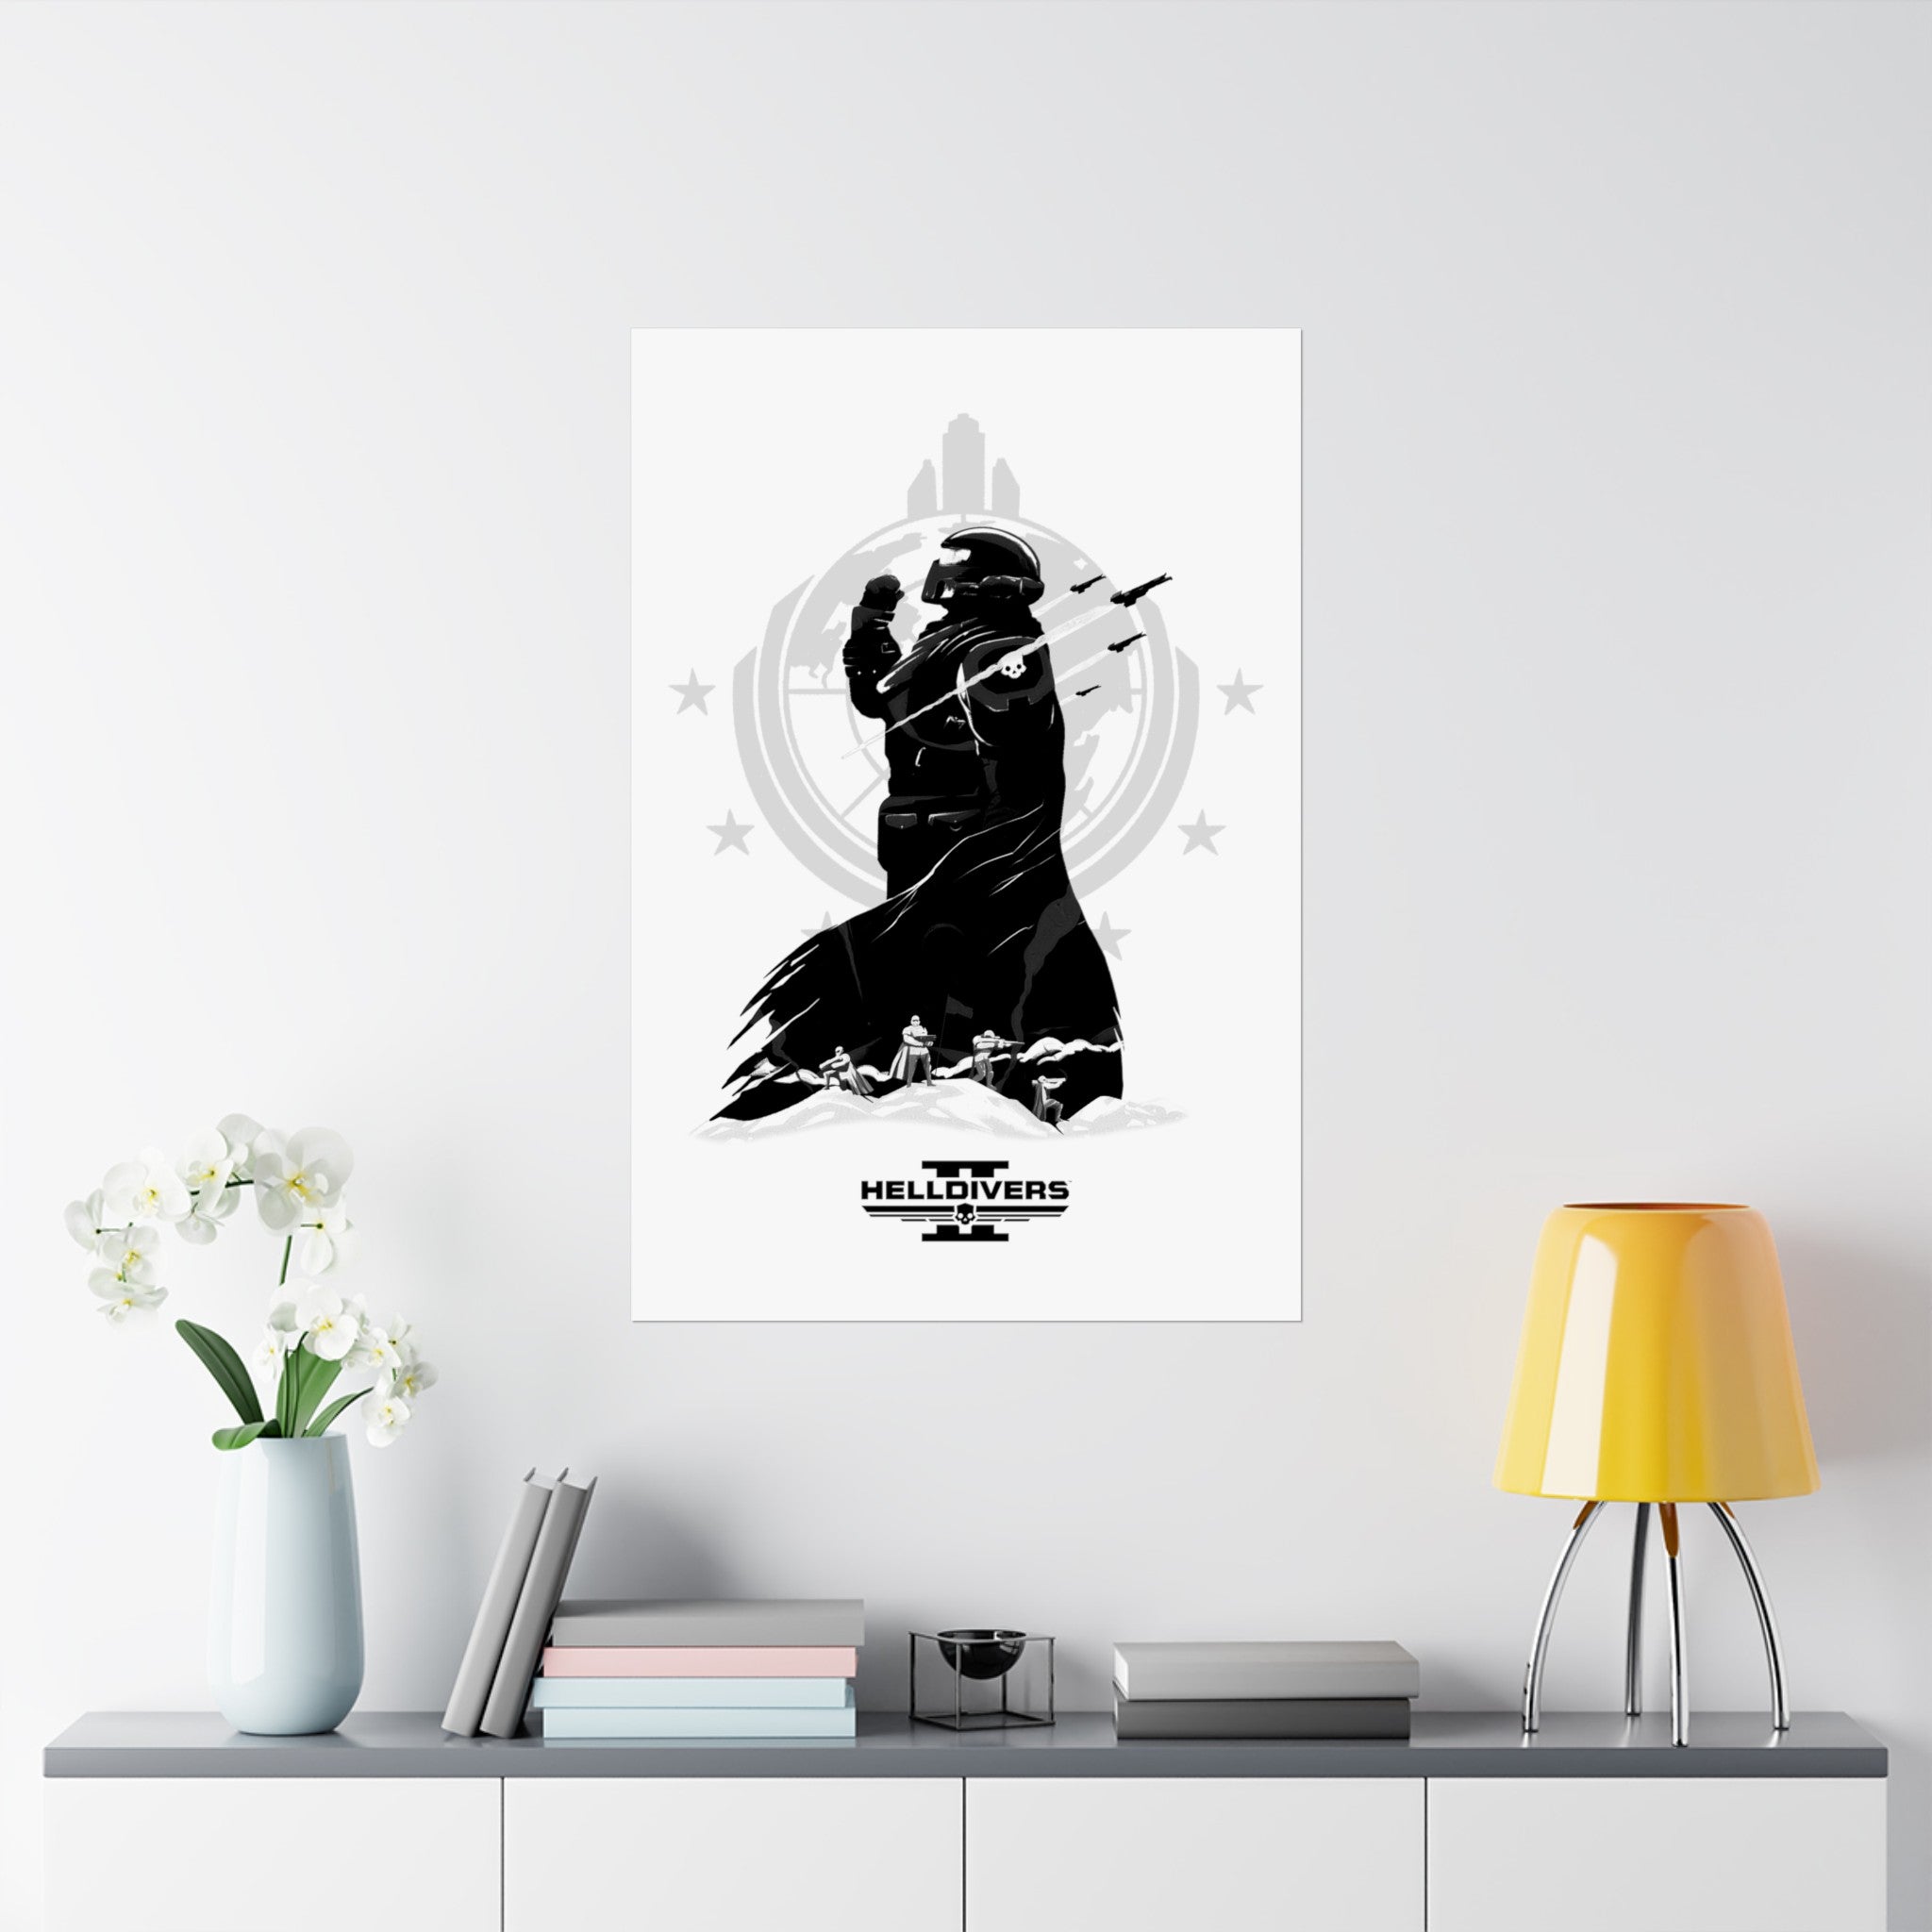 Helldivers 2 Matte Vertical Posters  Black & White Artistic Art Poster Design Minimalistic Gift Gamer Game Fanart Abstract Graphic Democracy Liberty Birthday Christmas